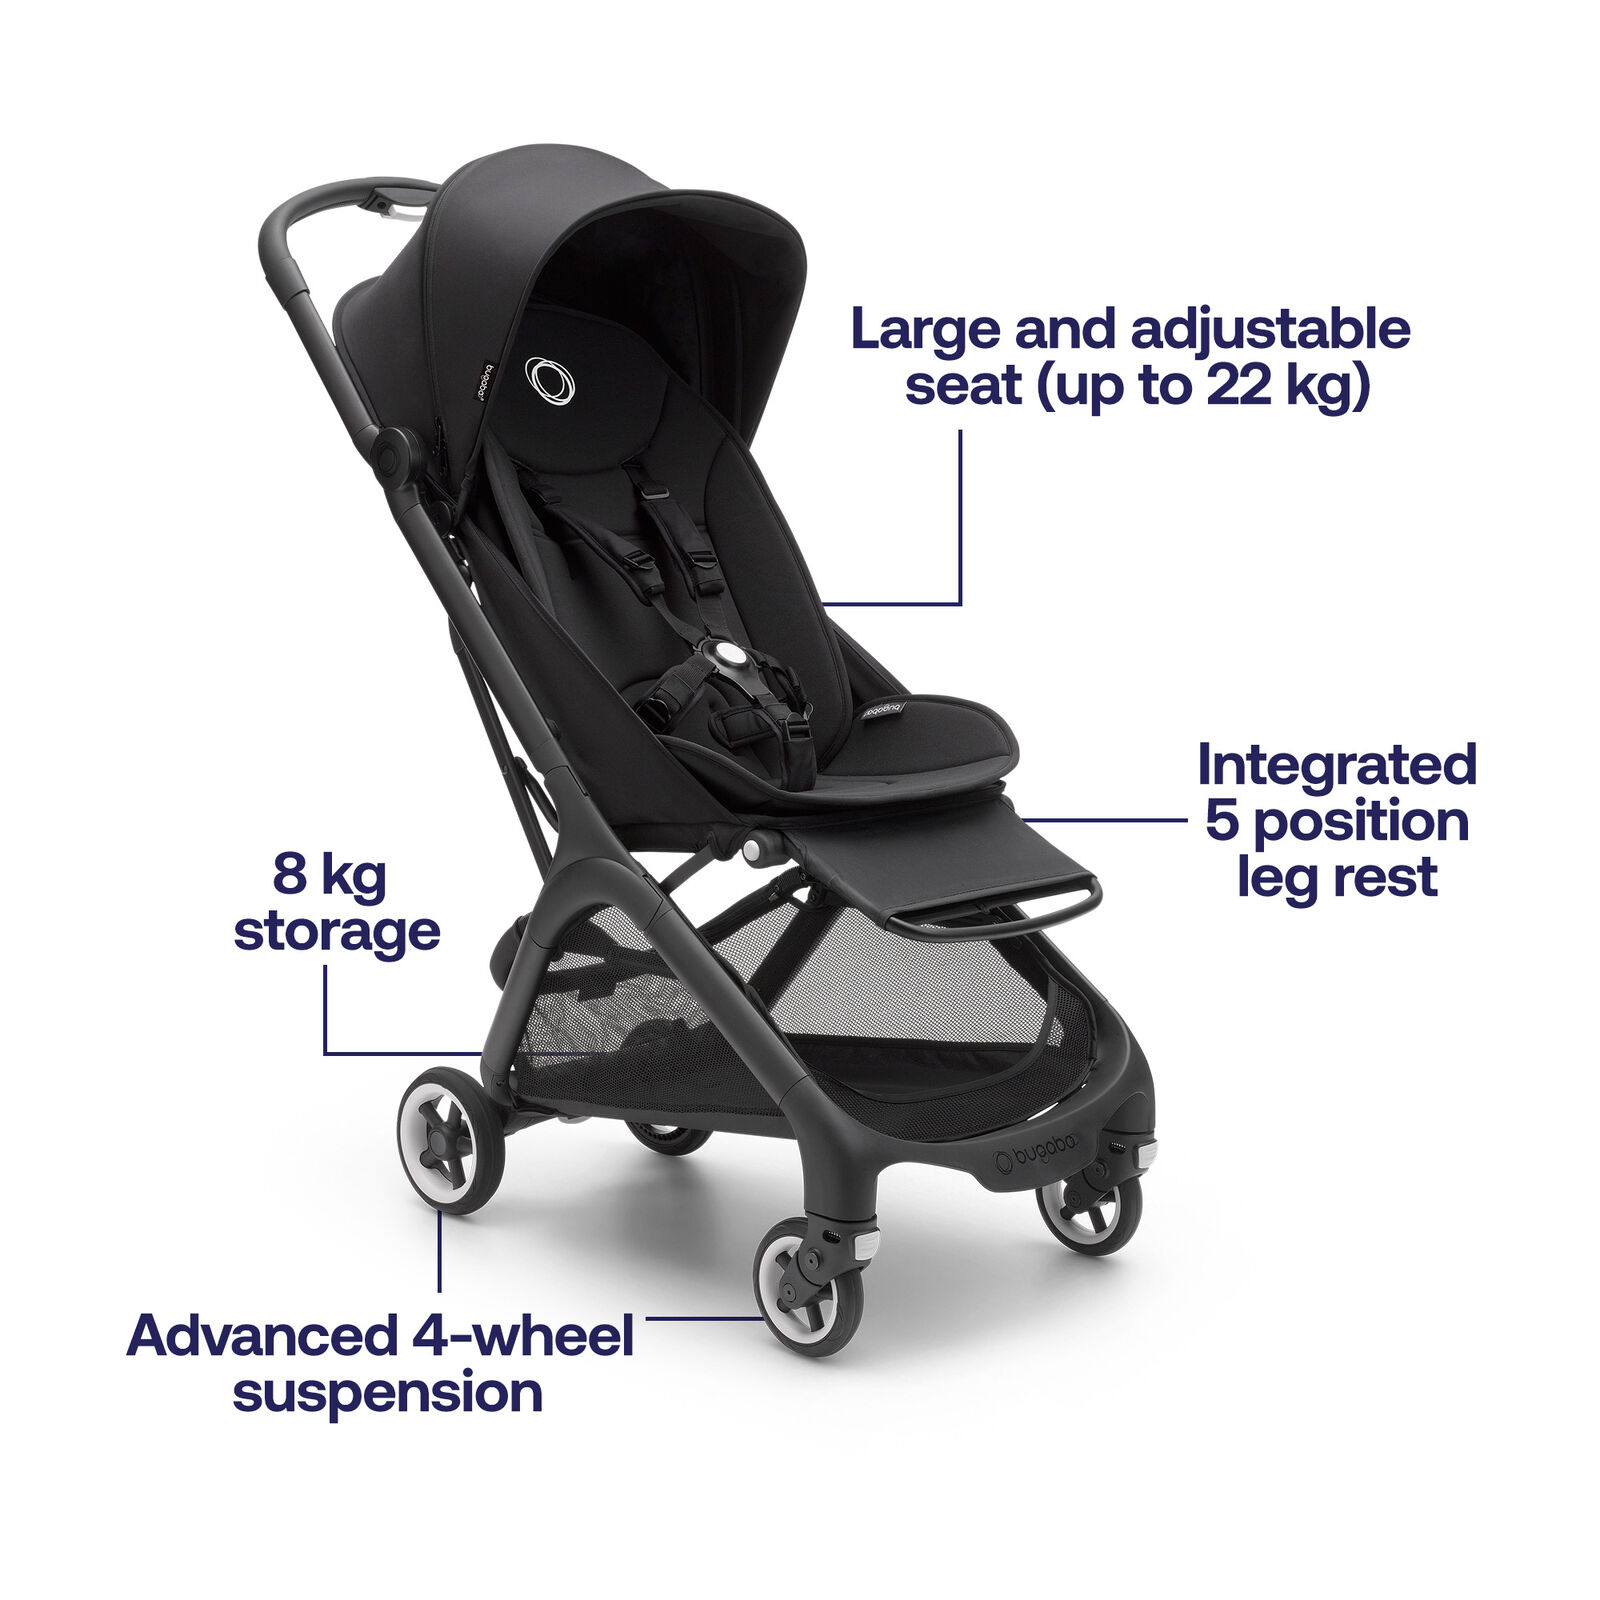 Bugaboo Butterfly seat pram - View 6